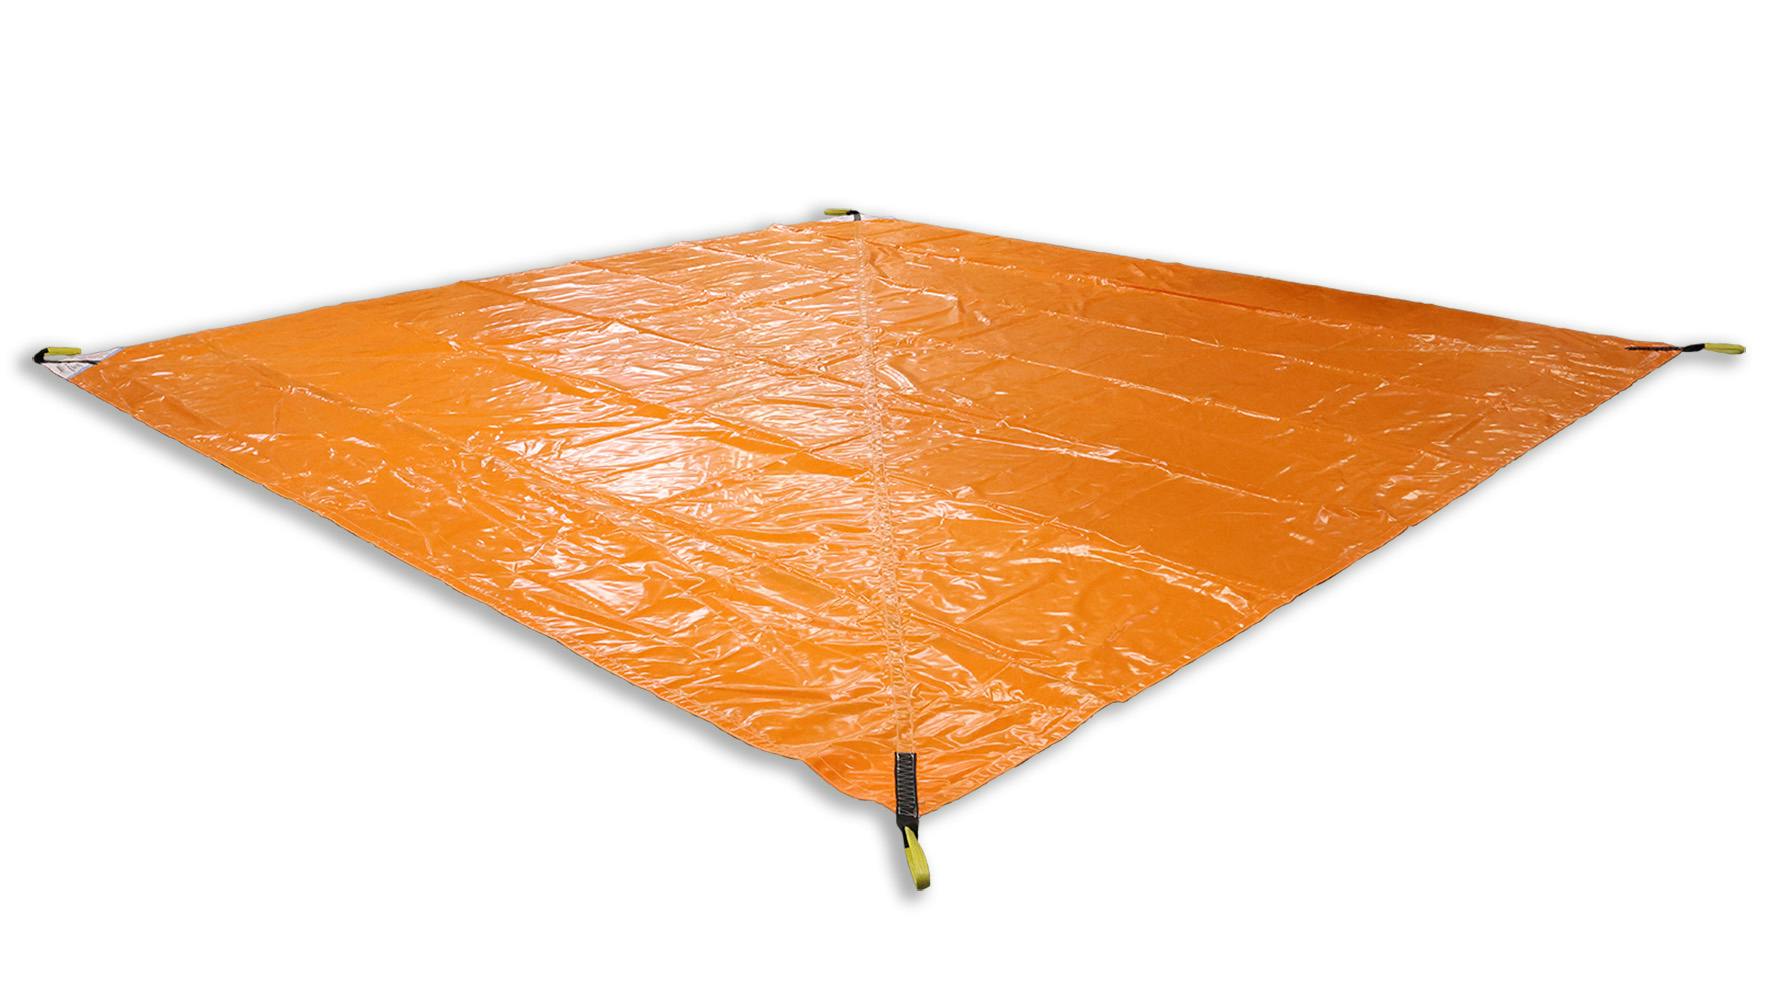 snow removal tarp construction jobsite protection full top side